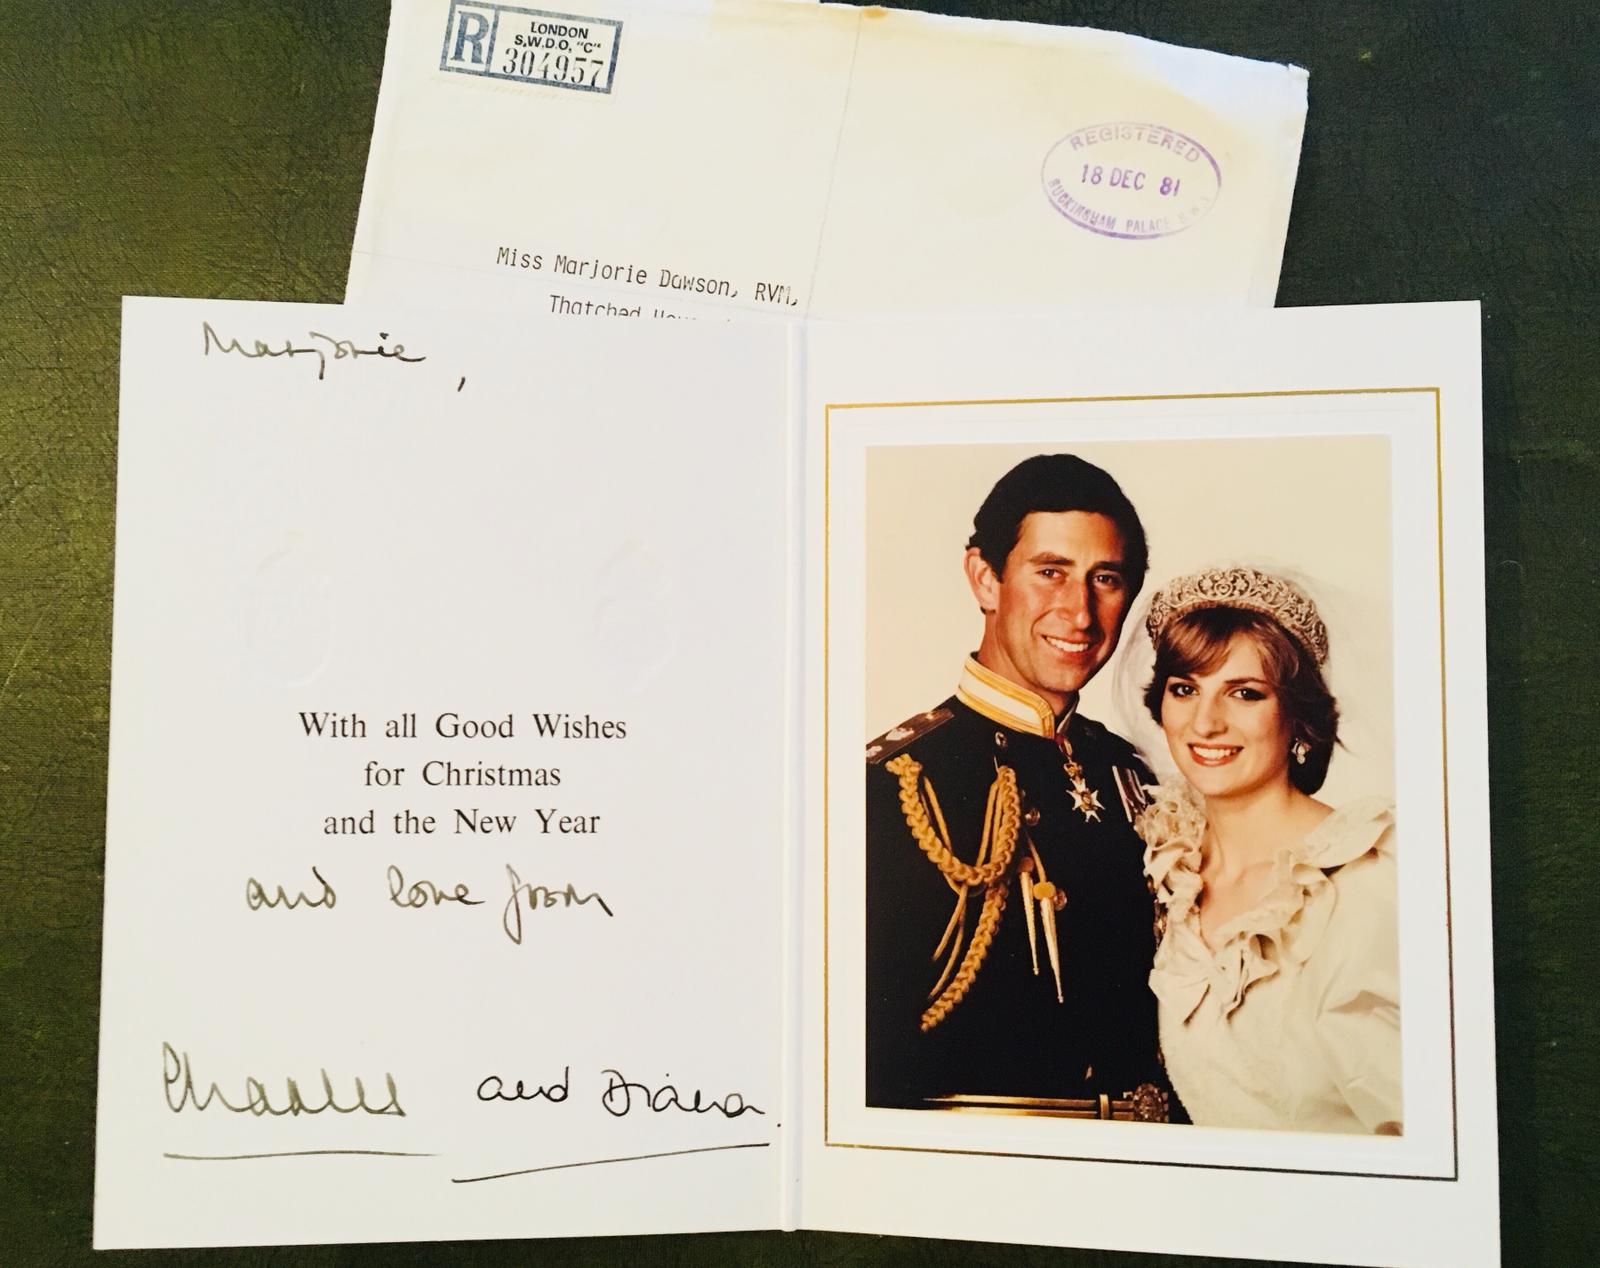 Christmas card from Charles and Diana